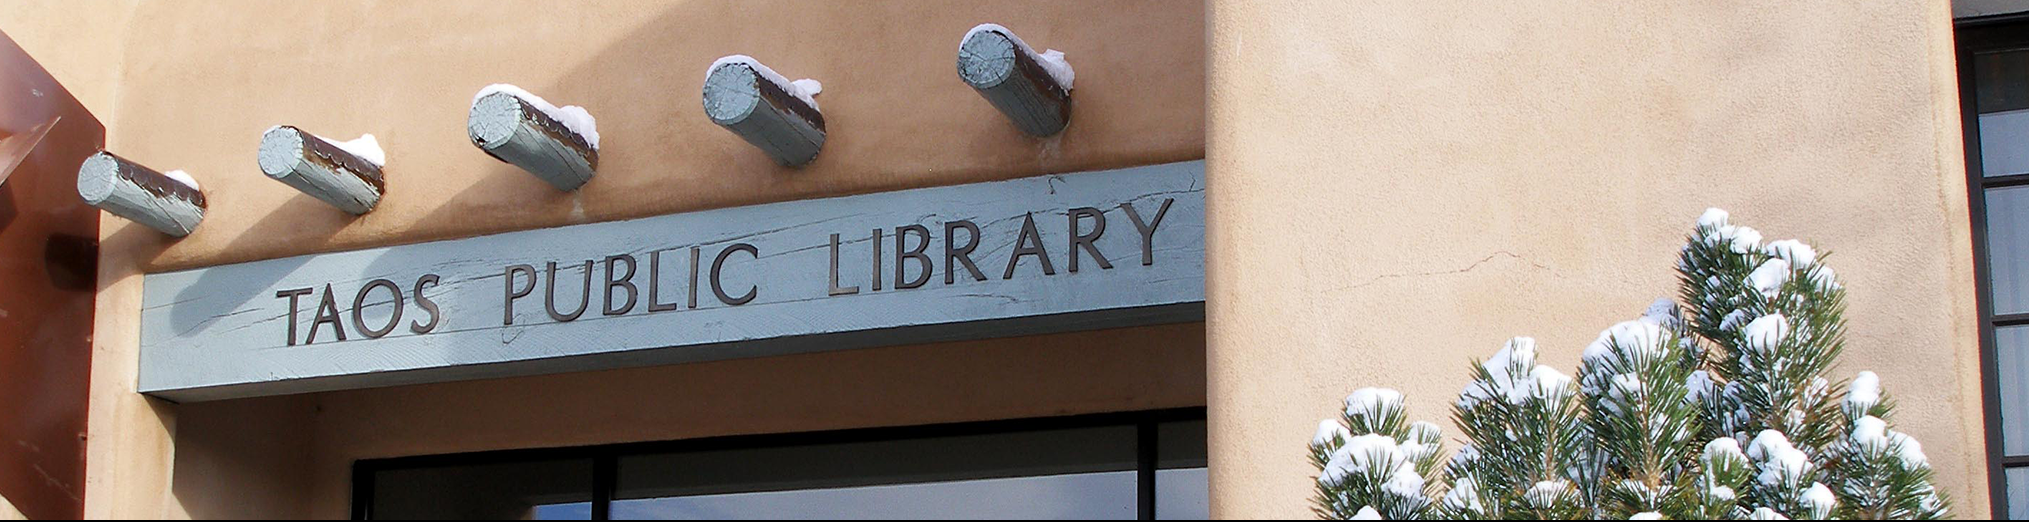  The Friends of Taos Public Library Agency Fund